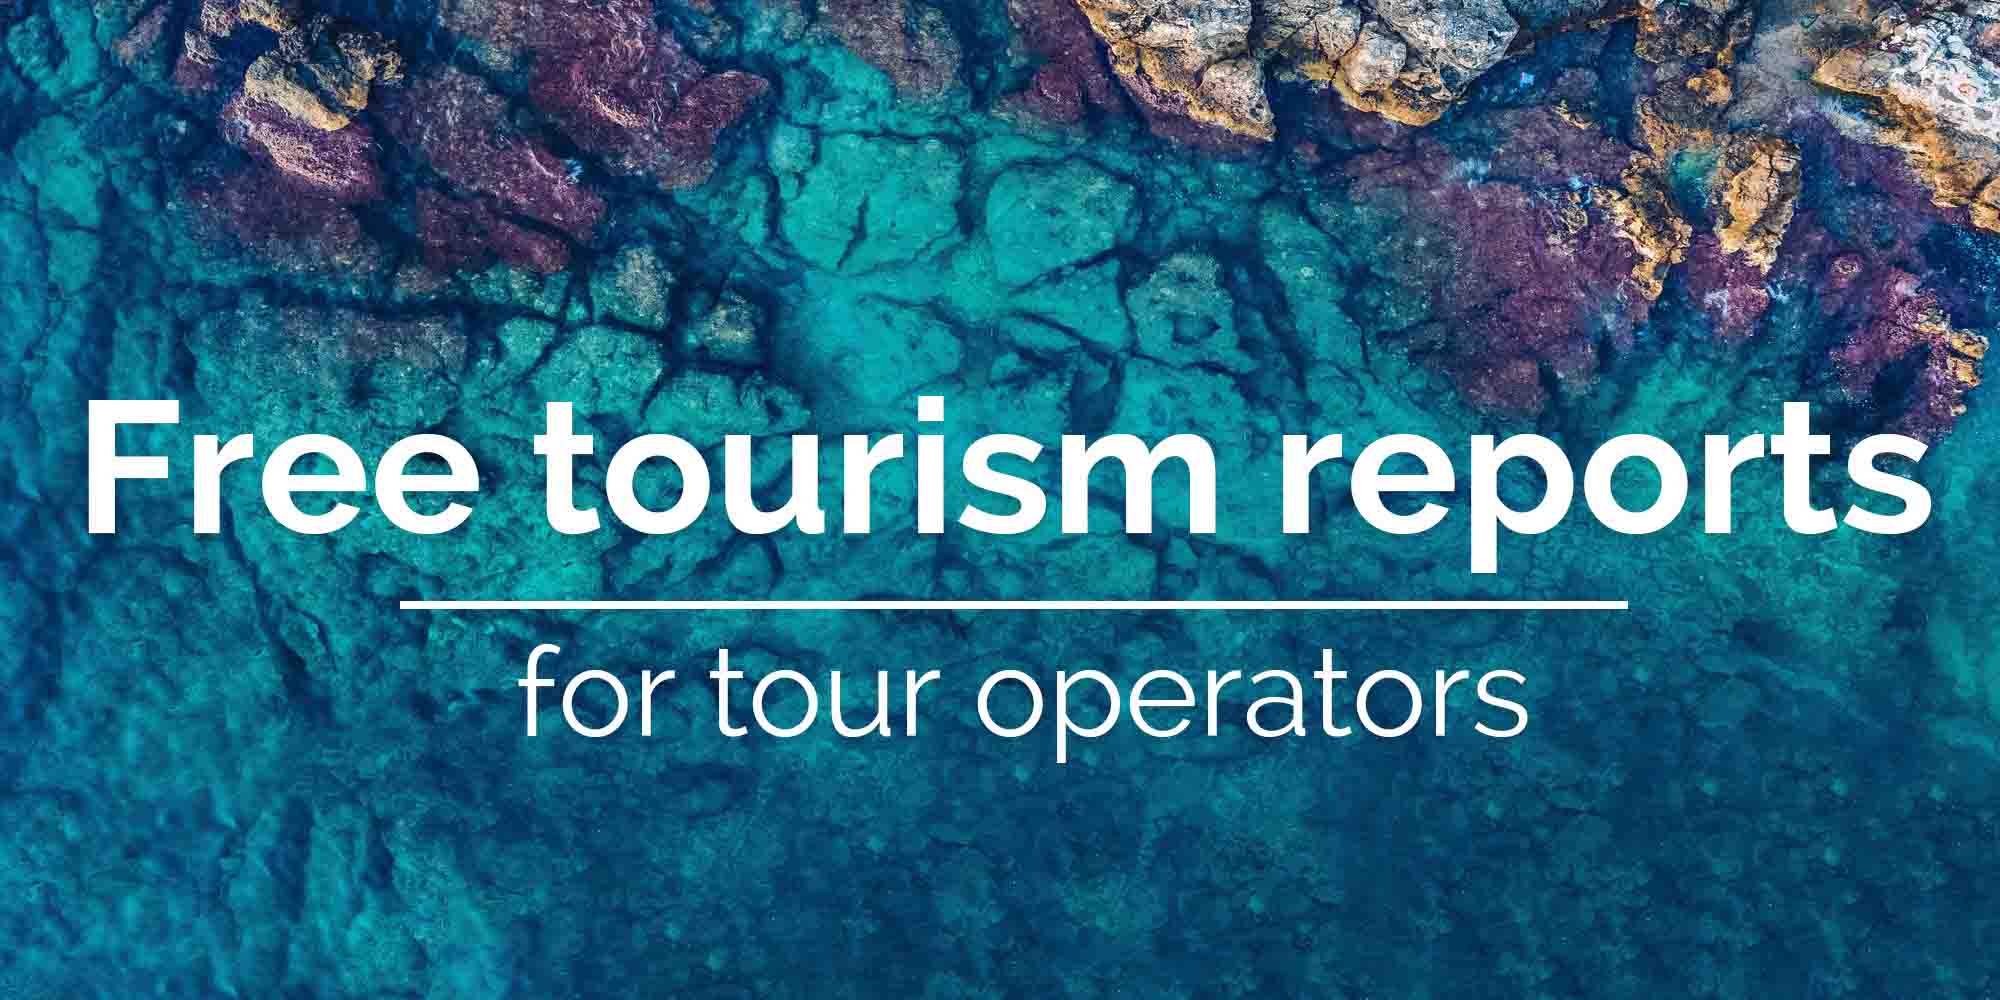 5 tourism reports to guide decision making in 2021